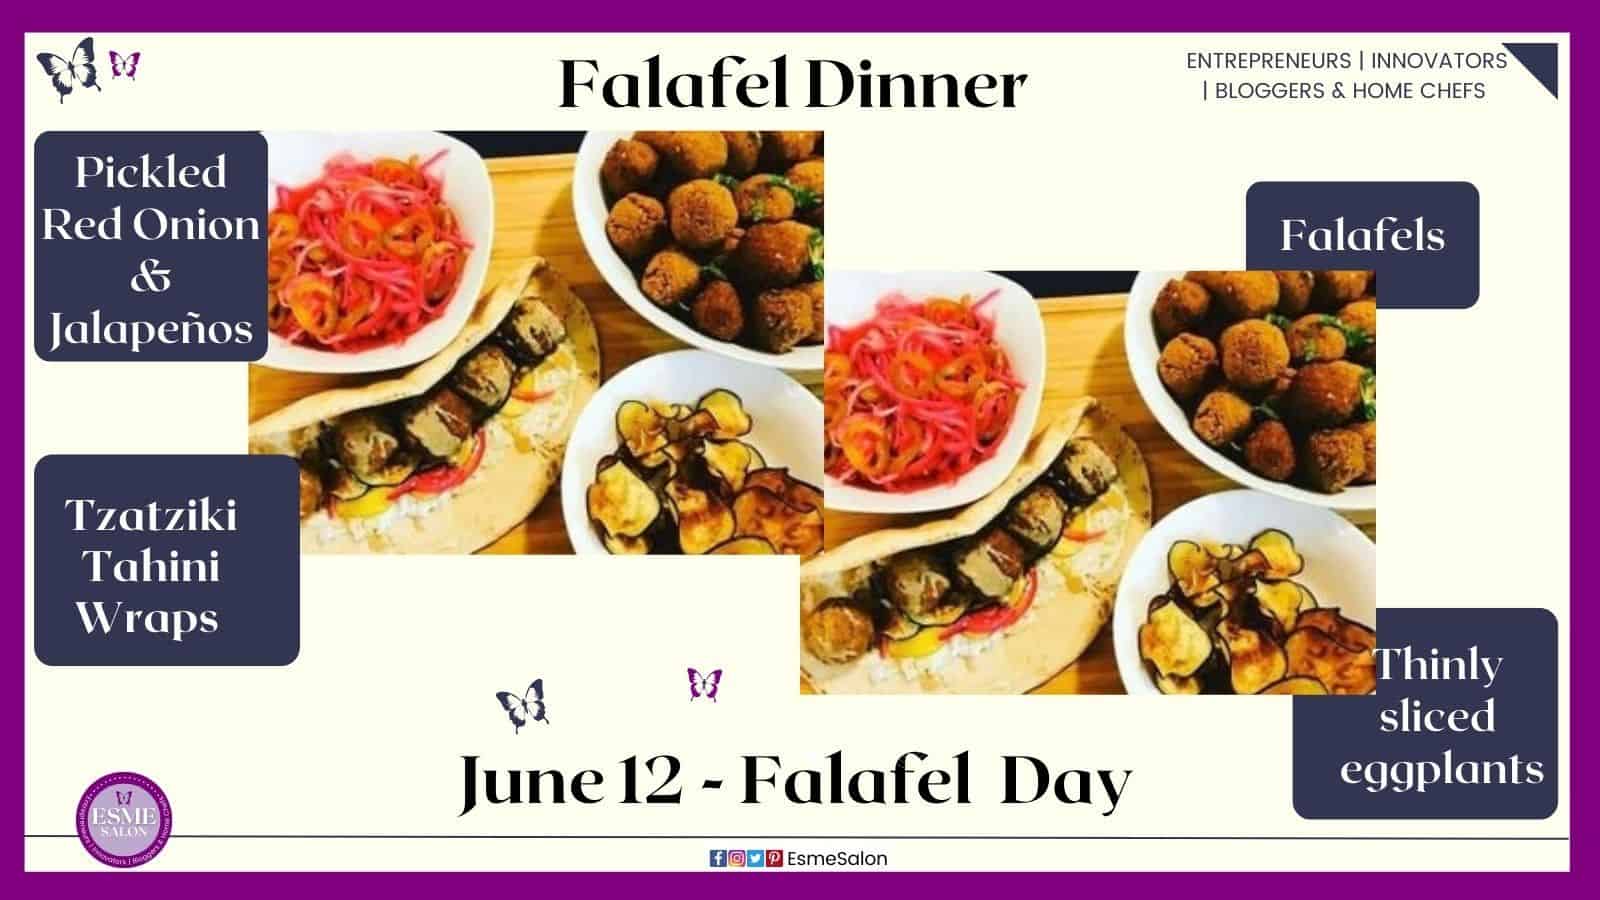 an image of Falafel balls with Pickled Red Onion & Jalapeños and Tahini